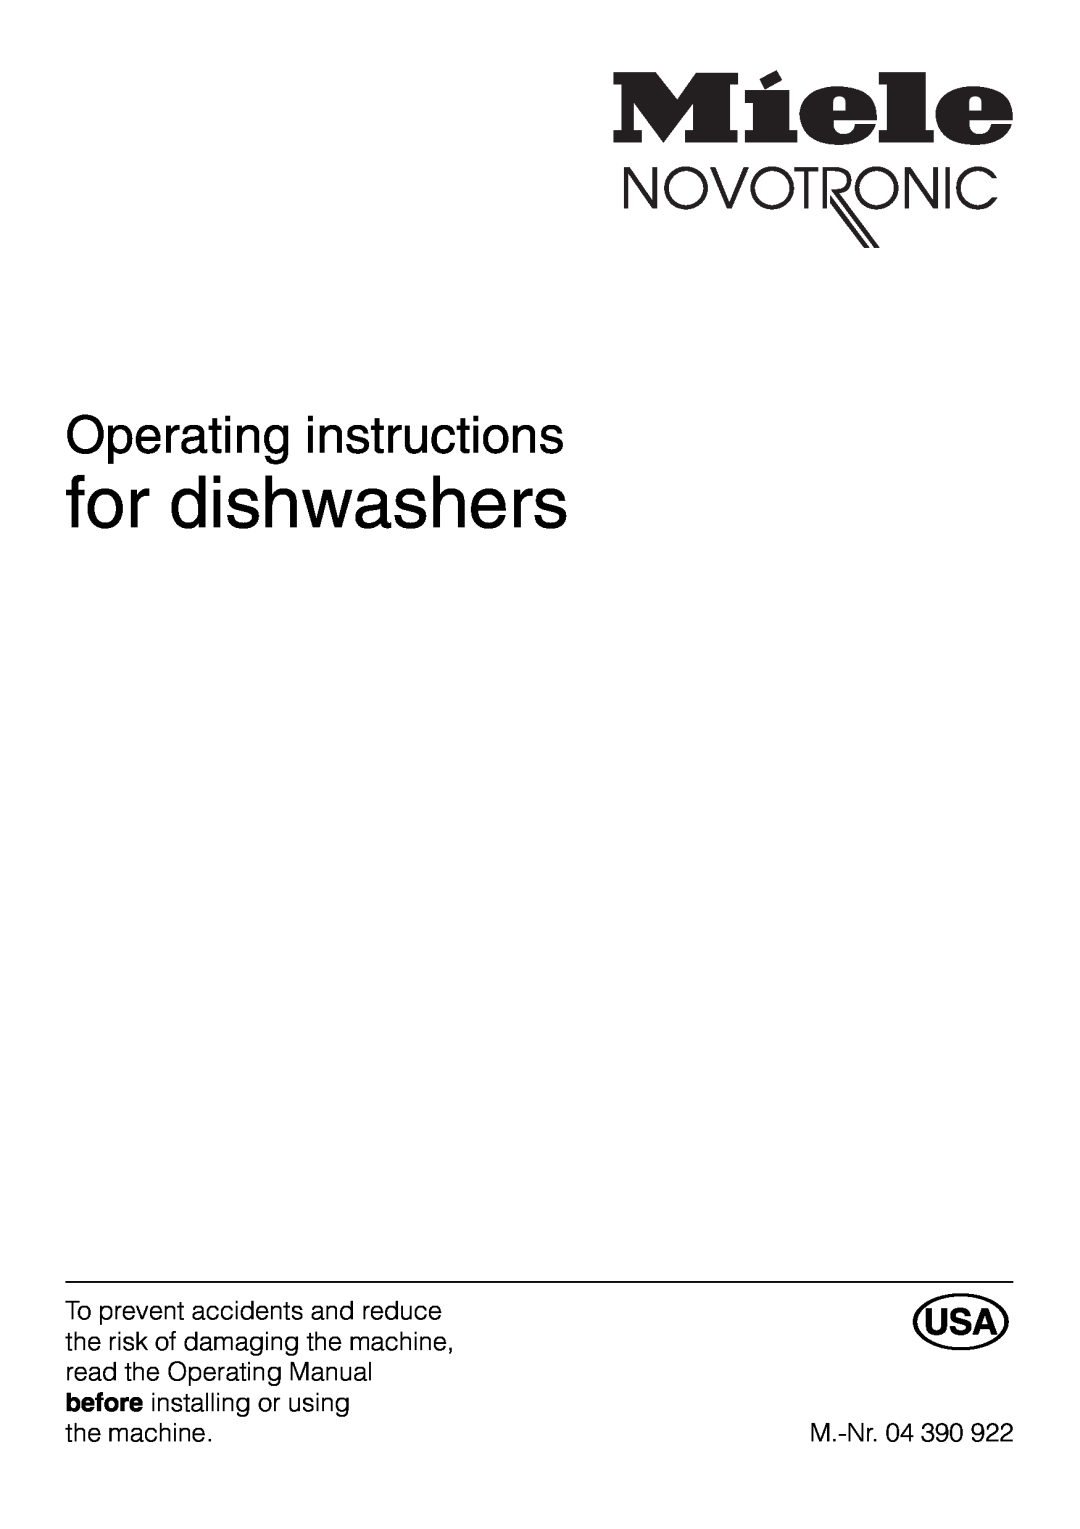 Miele M.-NR. 04 390 922 operating instructions for dishwashers, Operating instructions 